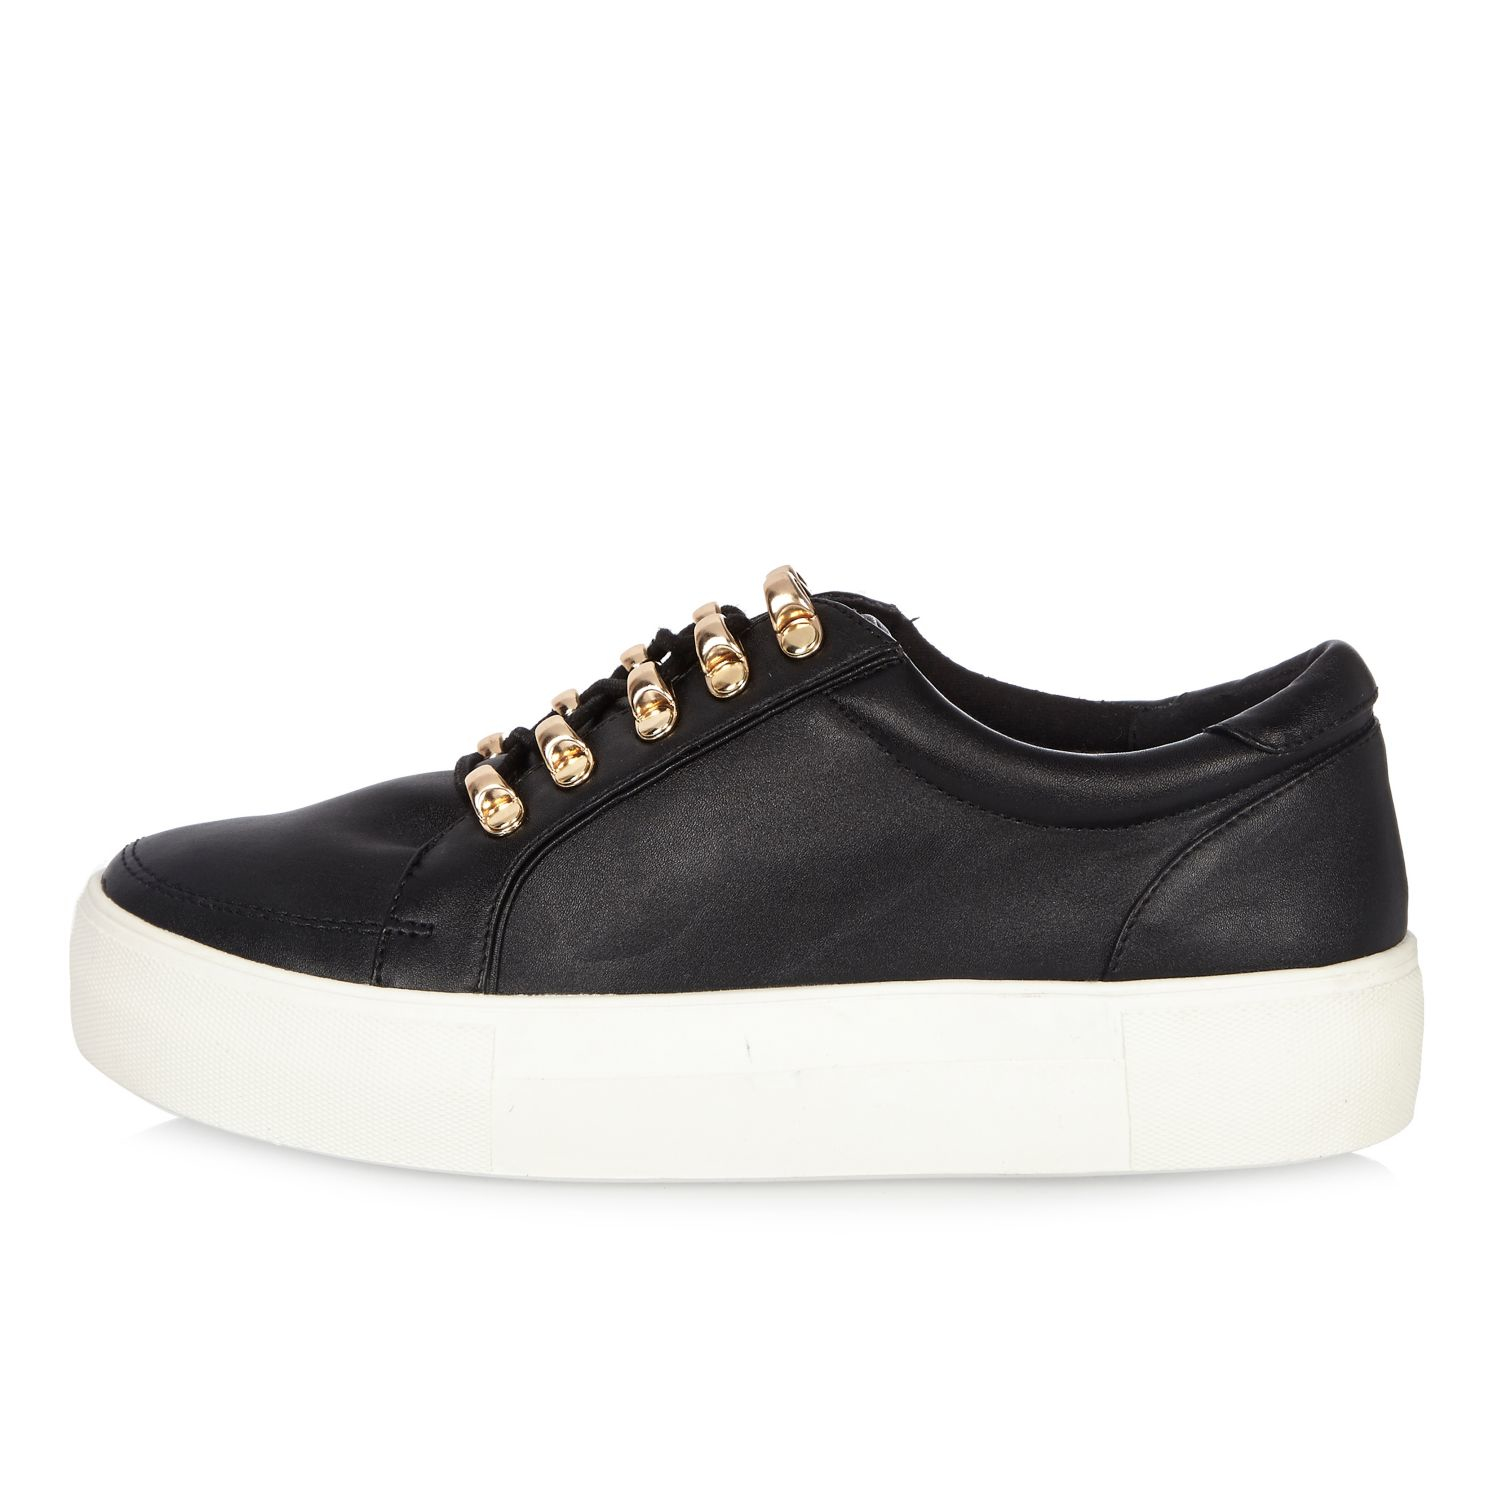 River Island Black Leather Look Platform Trainers in Black - Lyst